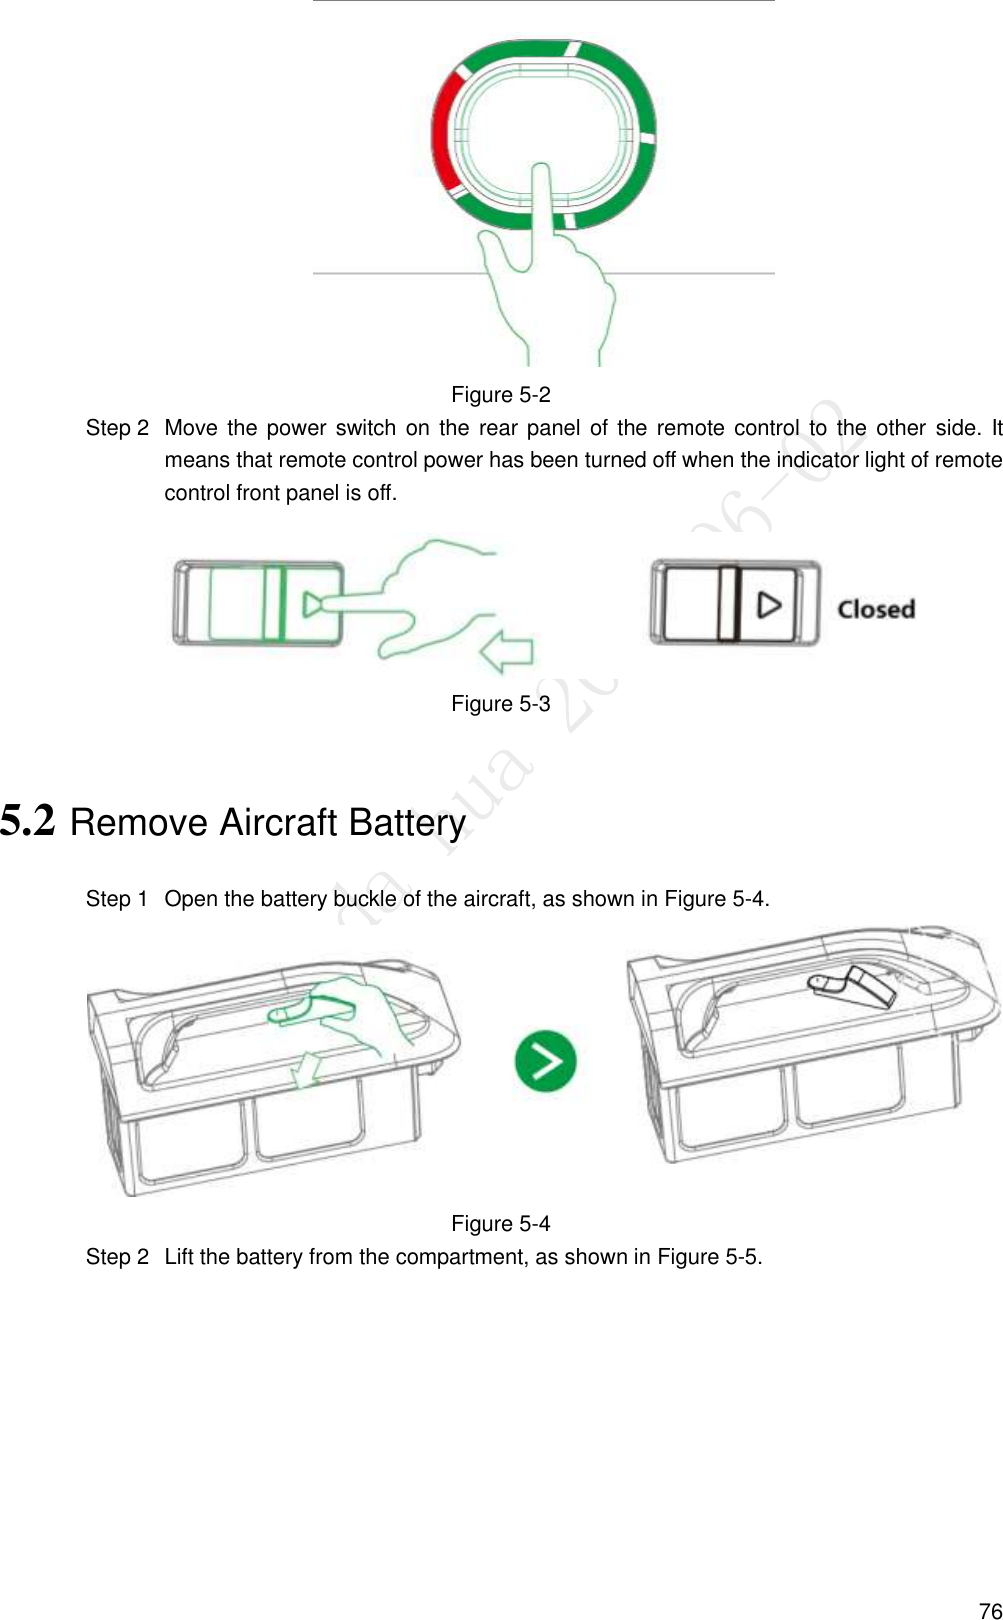  76  Figure 5-2   Move the power switch on the rear panel of the remote control to the other  side. It Step 2means that remote control power has been turned off when the indicator light of remote control front panel is off.  Figure 5-3 5.2 Remove Aircraft Battery   Open the battery buckle of the aircraft, as shown in Figure 5-4. Step 1 Figure 5-4   Lift the battery from the compartment, as shown in Figure 5-5. Step 2